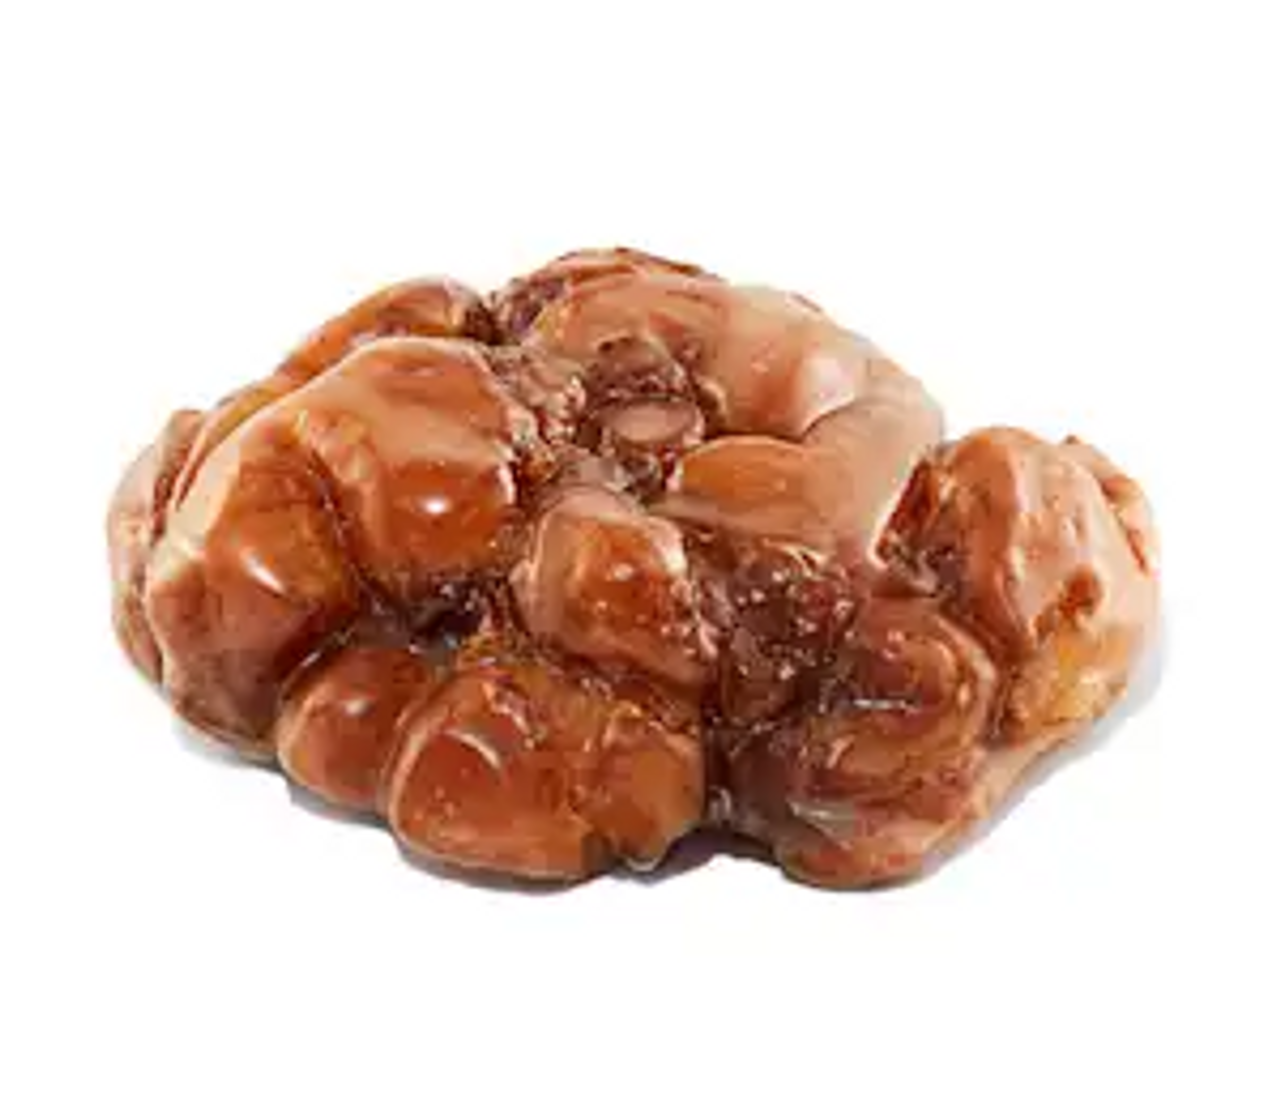 The Classic Dunkin Donuts Apple Fritter